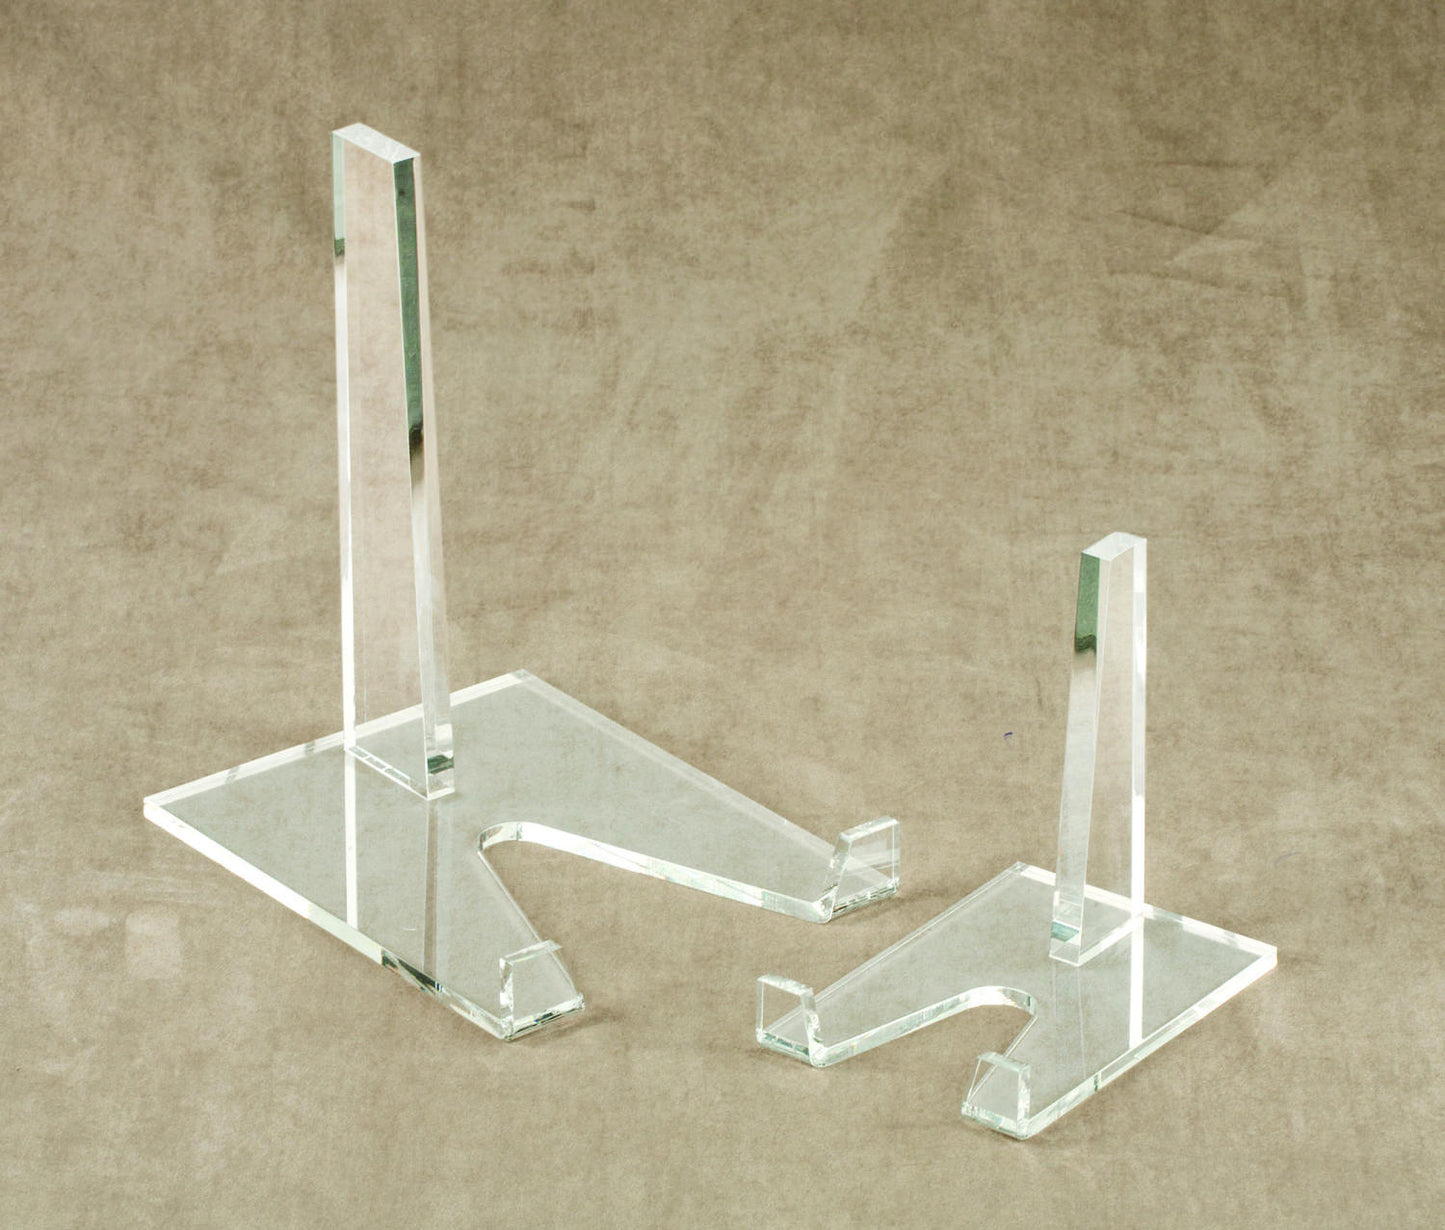 Large Acrylic Display Stands